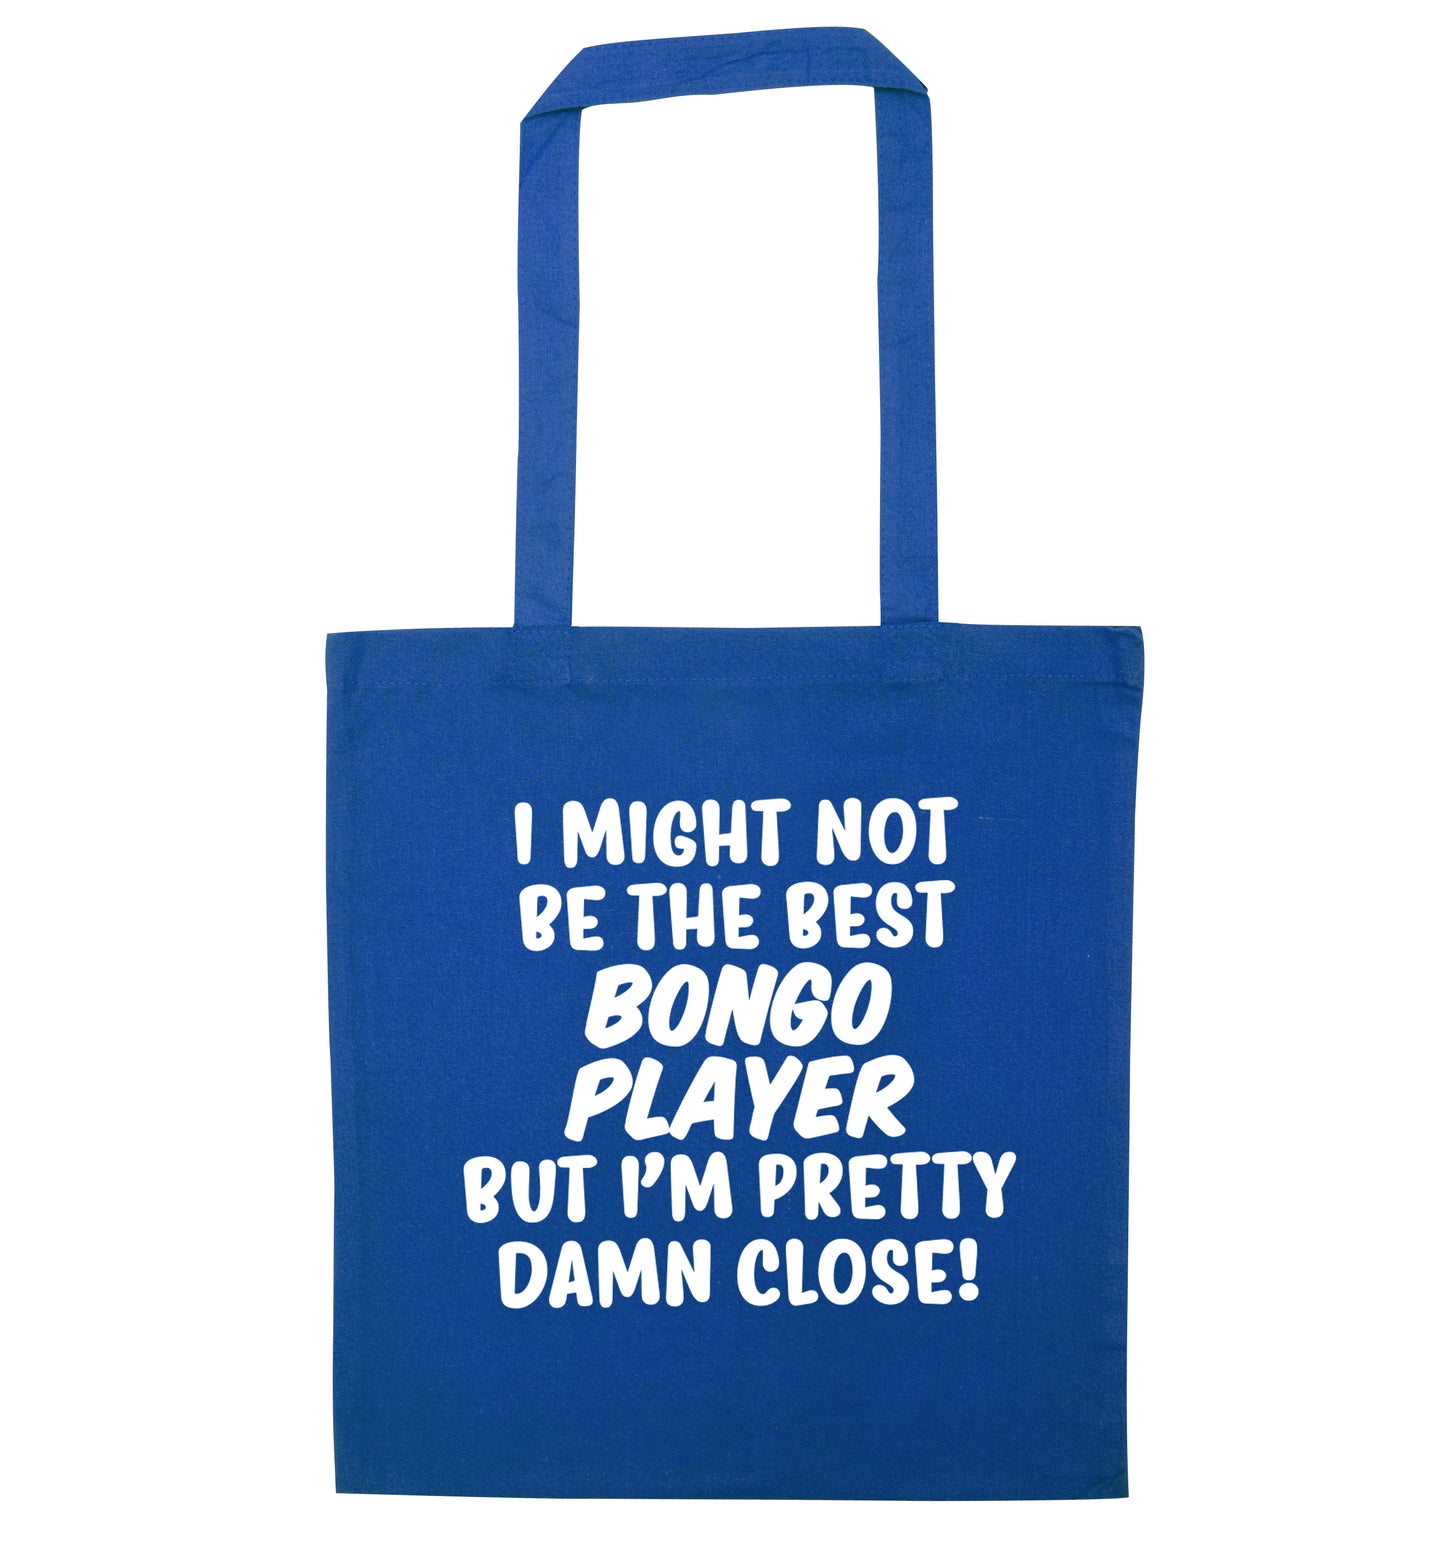 I might not be the best bongo player but I'm pretty close! blue tote bag